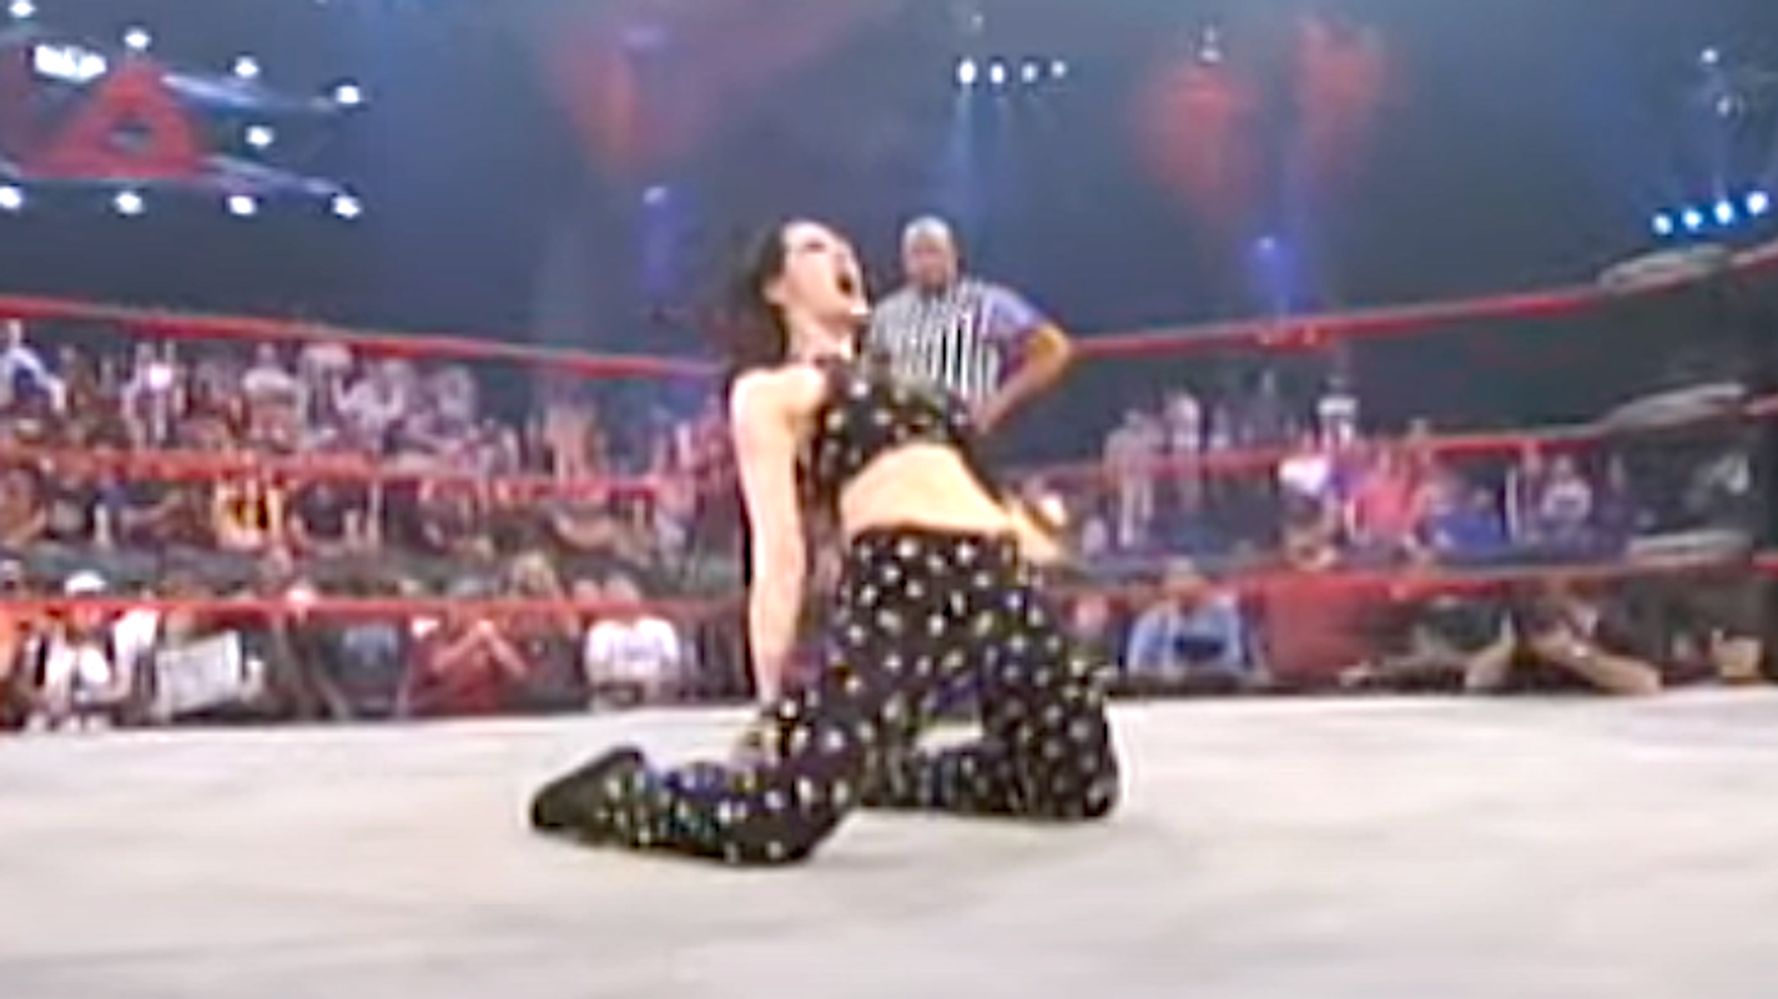 Former fighter Daffney Unger, also known as Scream Queen, dies at 46 after an alarming video